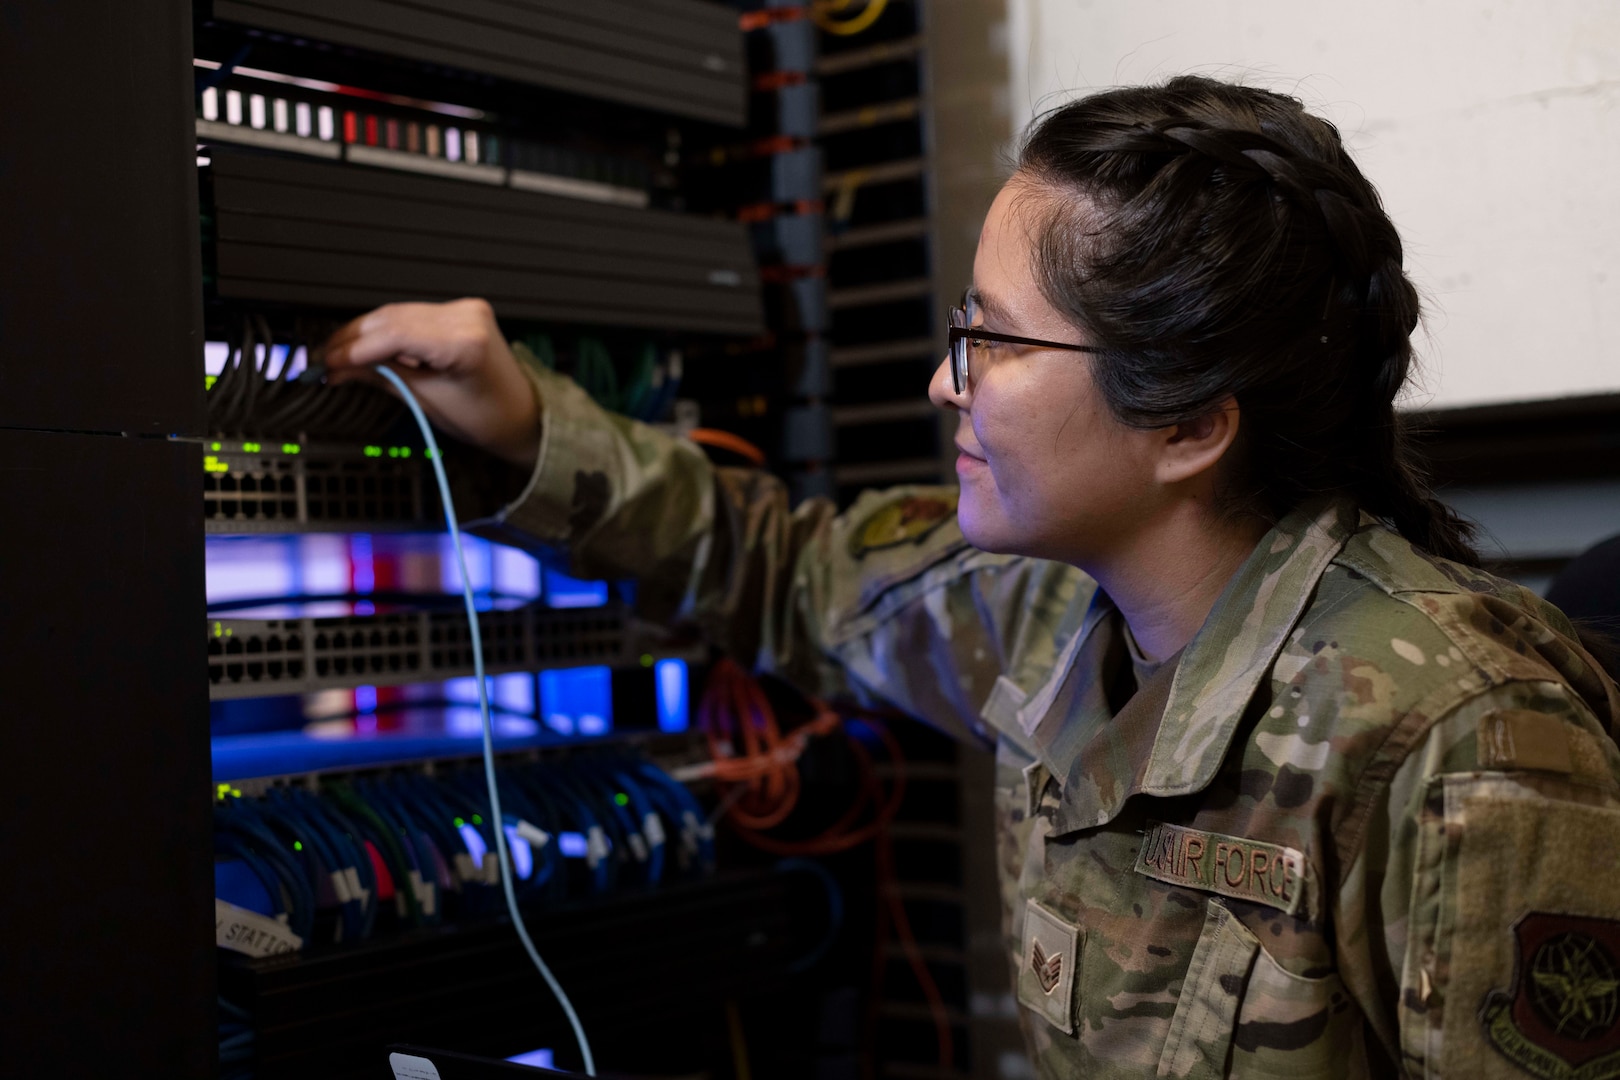 A woman wearing a military uniform plugs a wire into an electronic network.